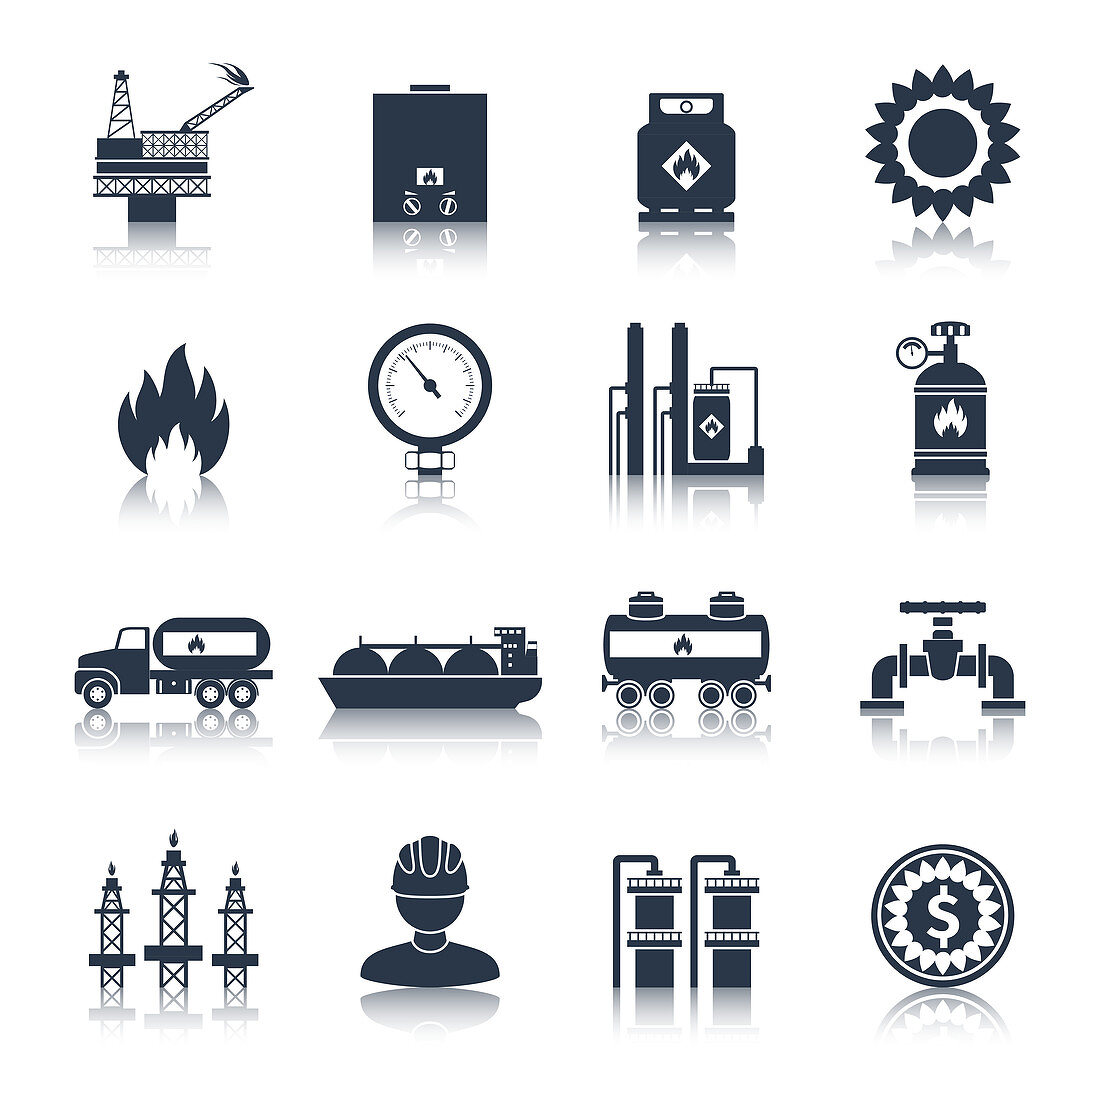 Gas industry icons, illustration